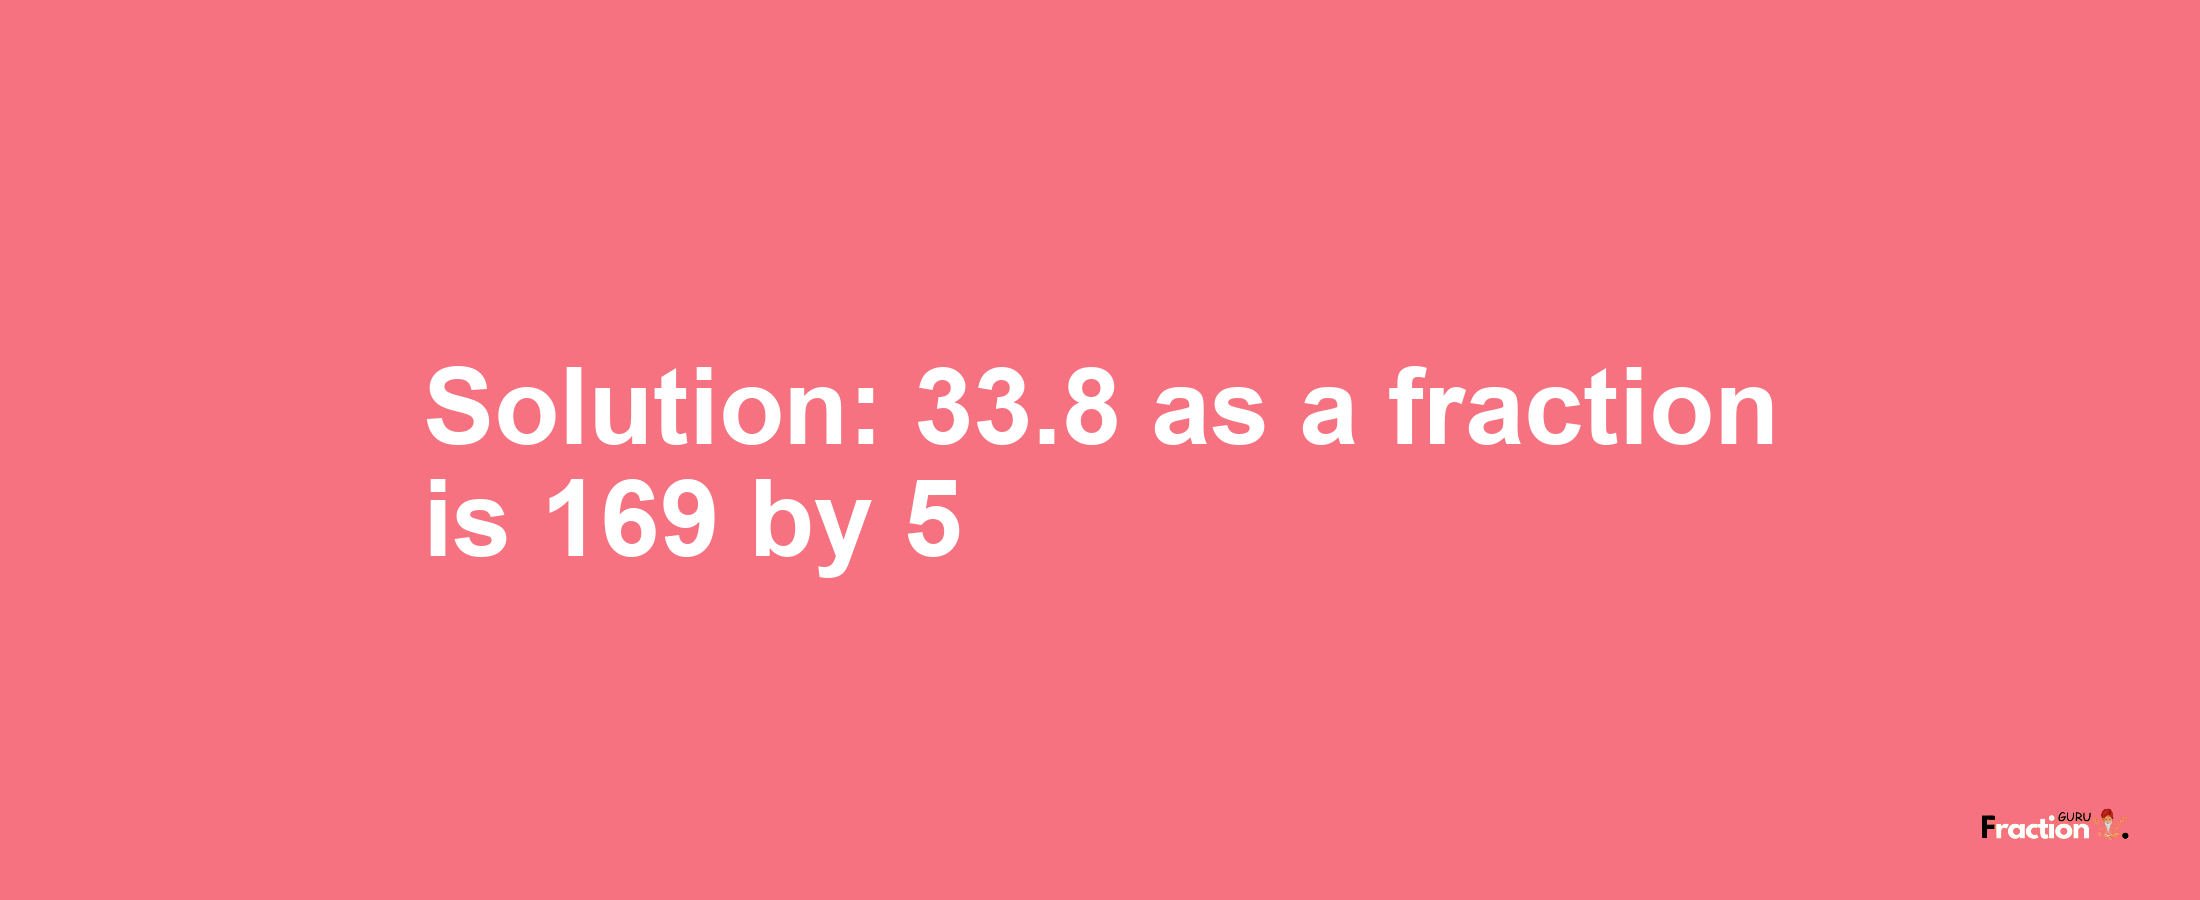 Solution:33.8 as a fraction is 169/5